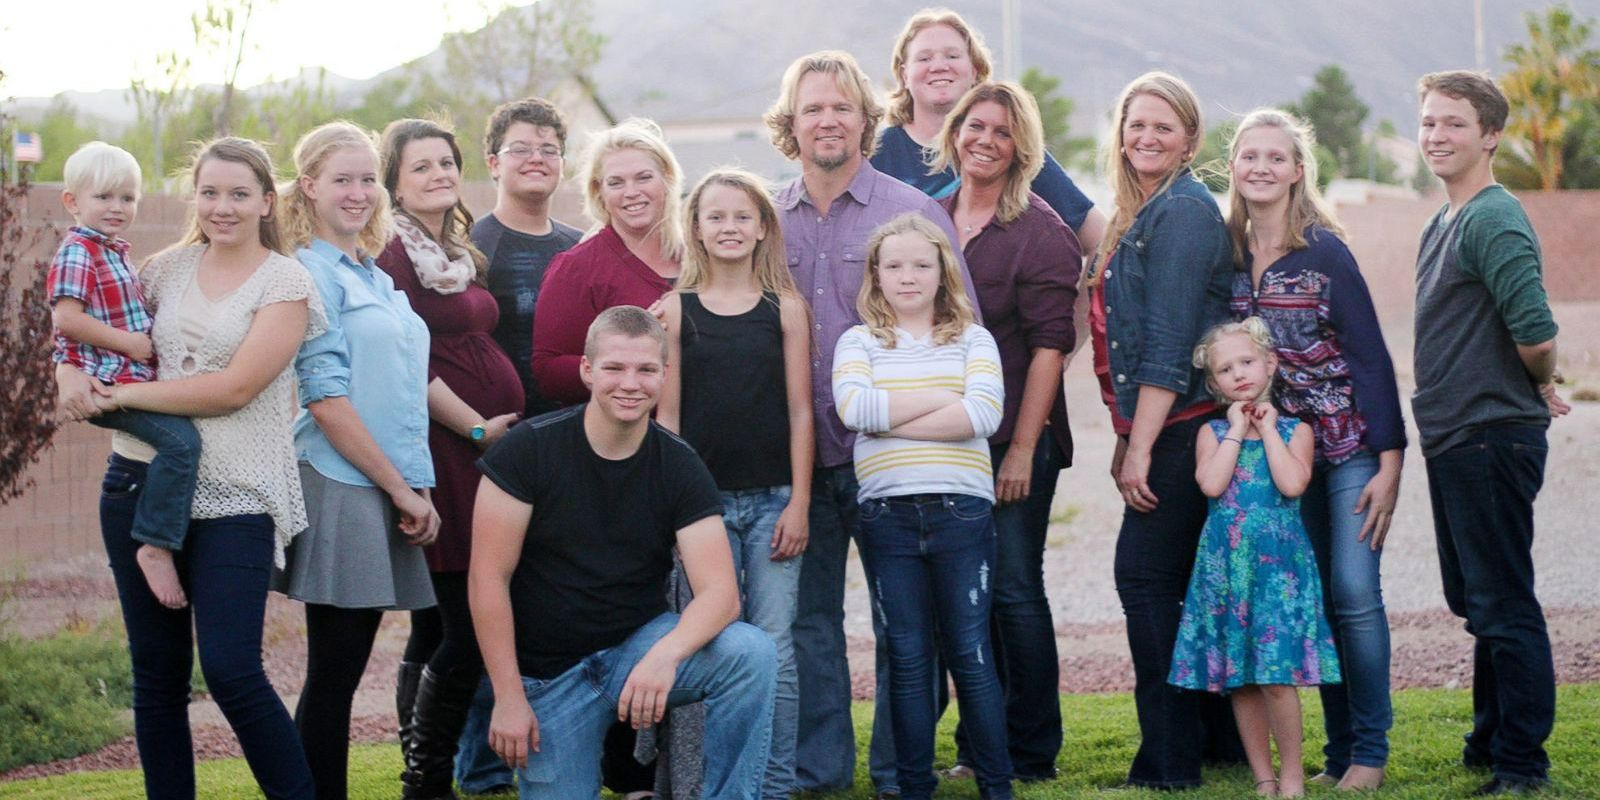 Sister Wives: What Hunter Brown Has Been Up To Since Returning To Arizona